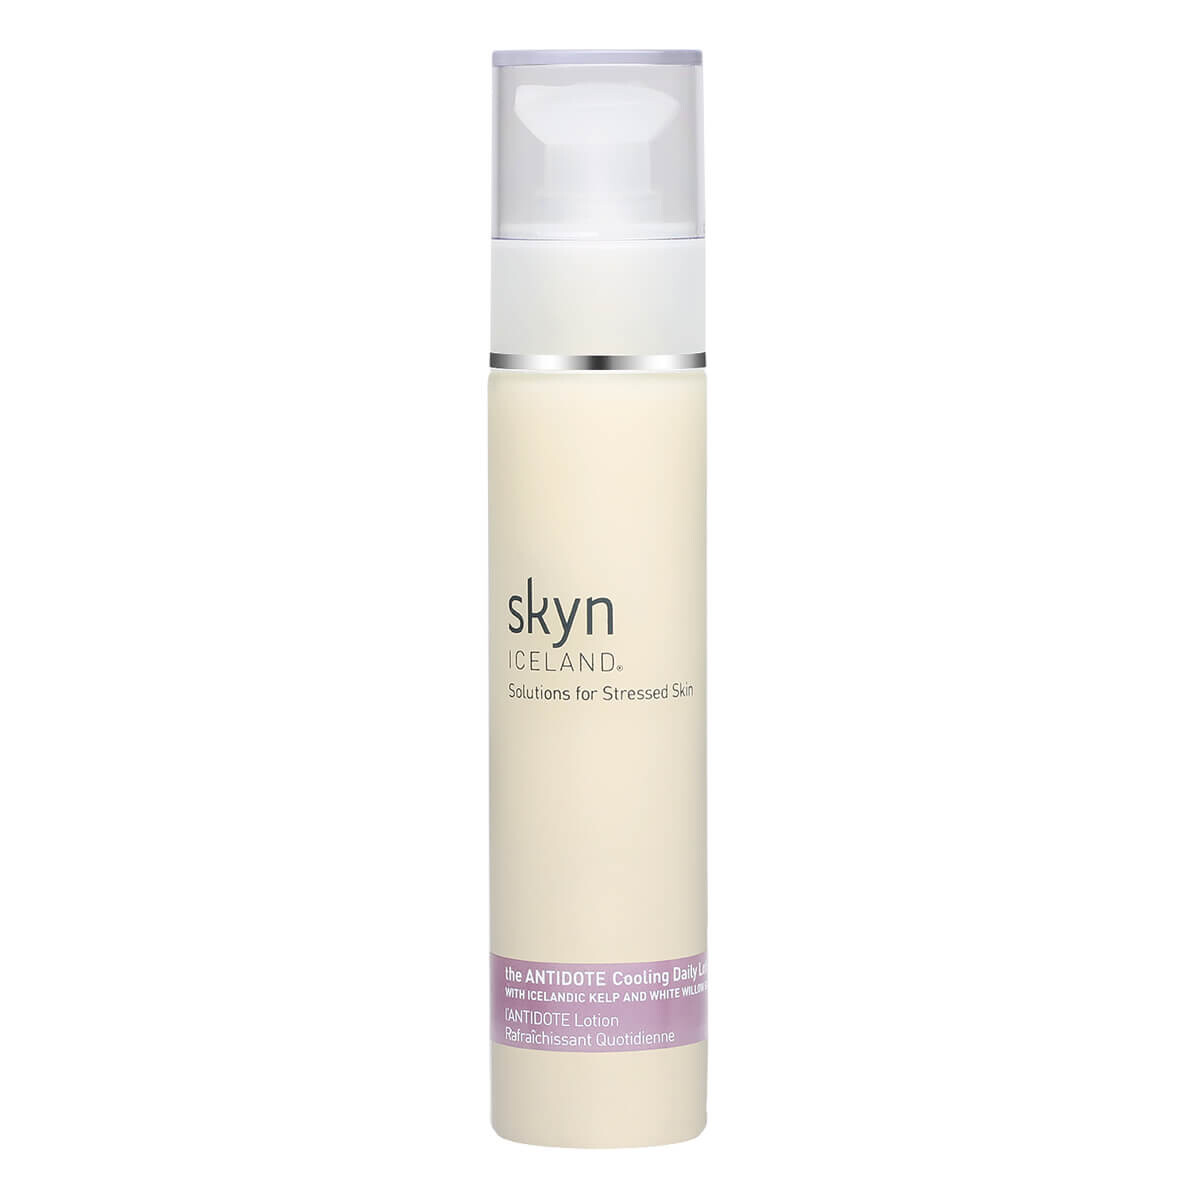 Billede af Skyn Iceland The ANTIDOTE Cooling Daily Lotion, 47 ml.